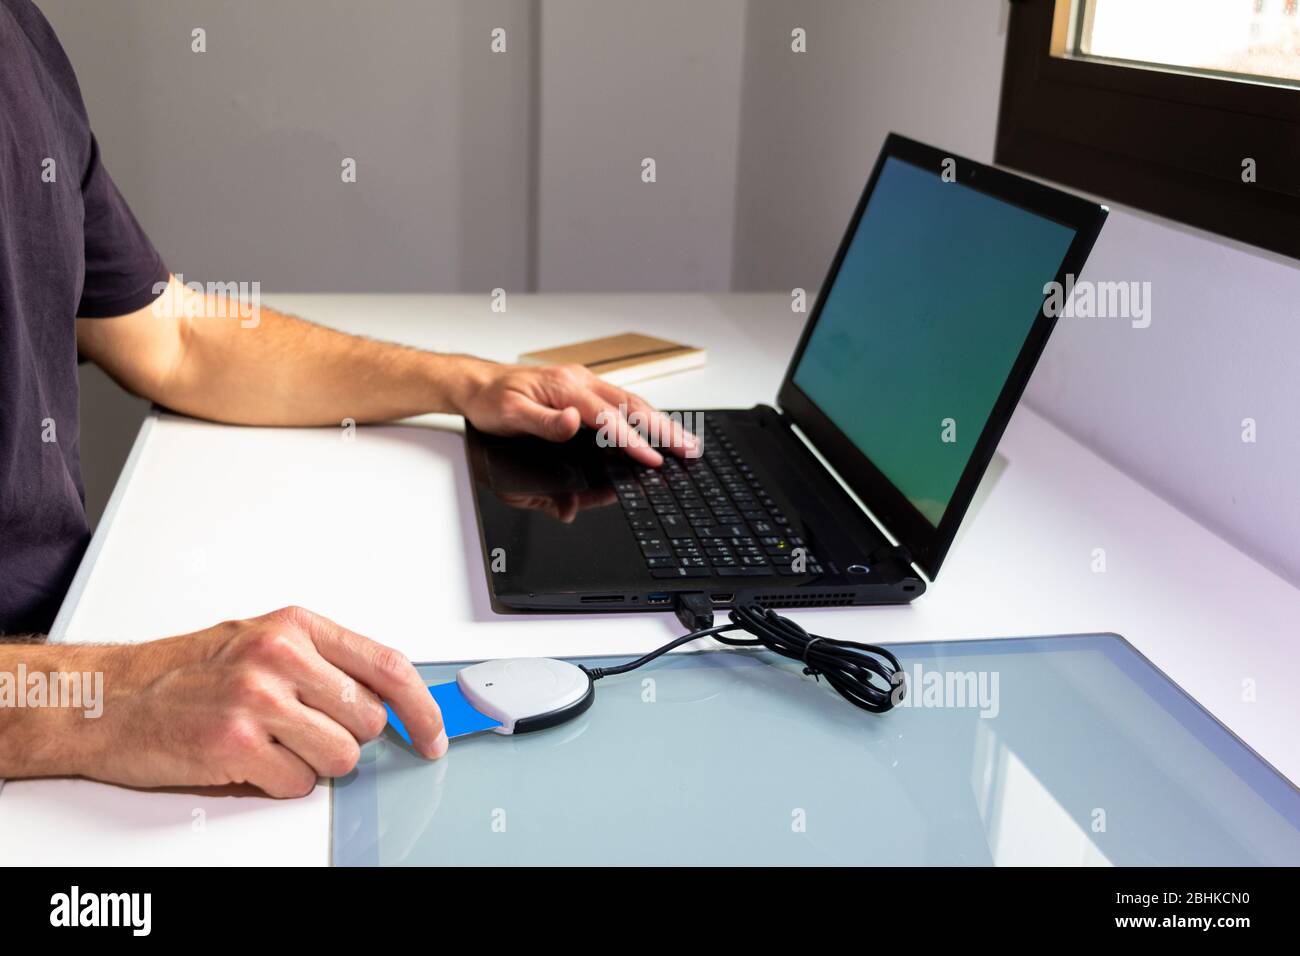 A man prepares to work from home with his laptop by identifying himself through a card reader. Covid-19 confinement concept Stock Photo